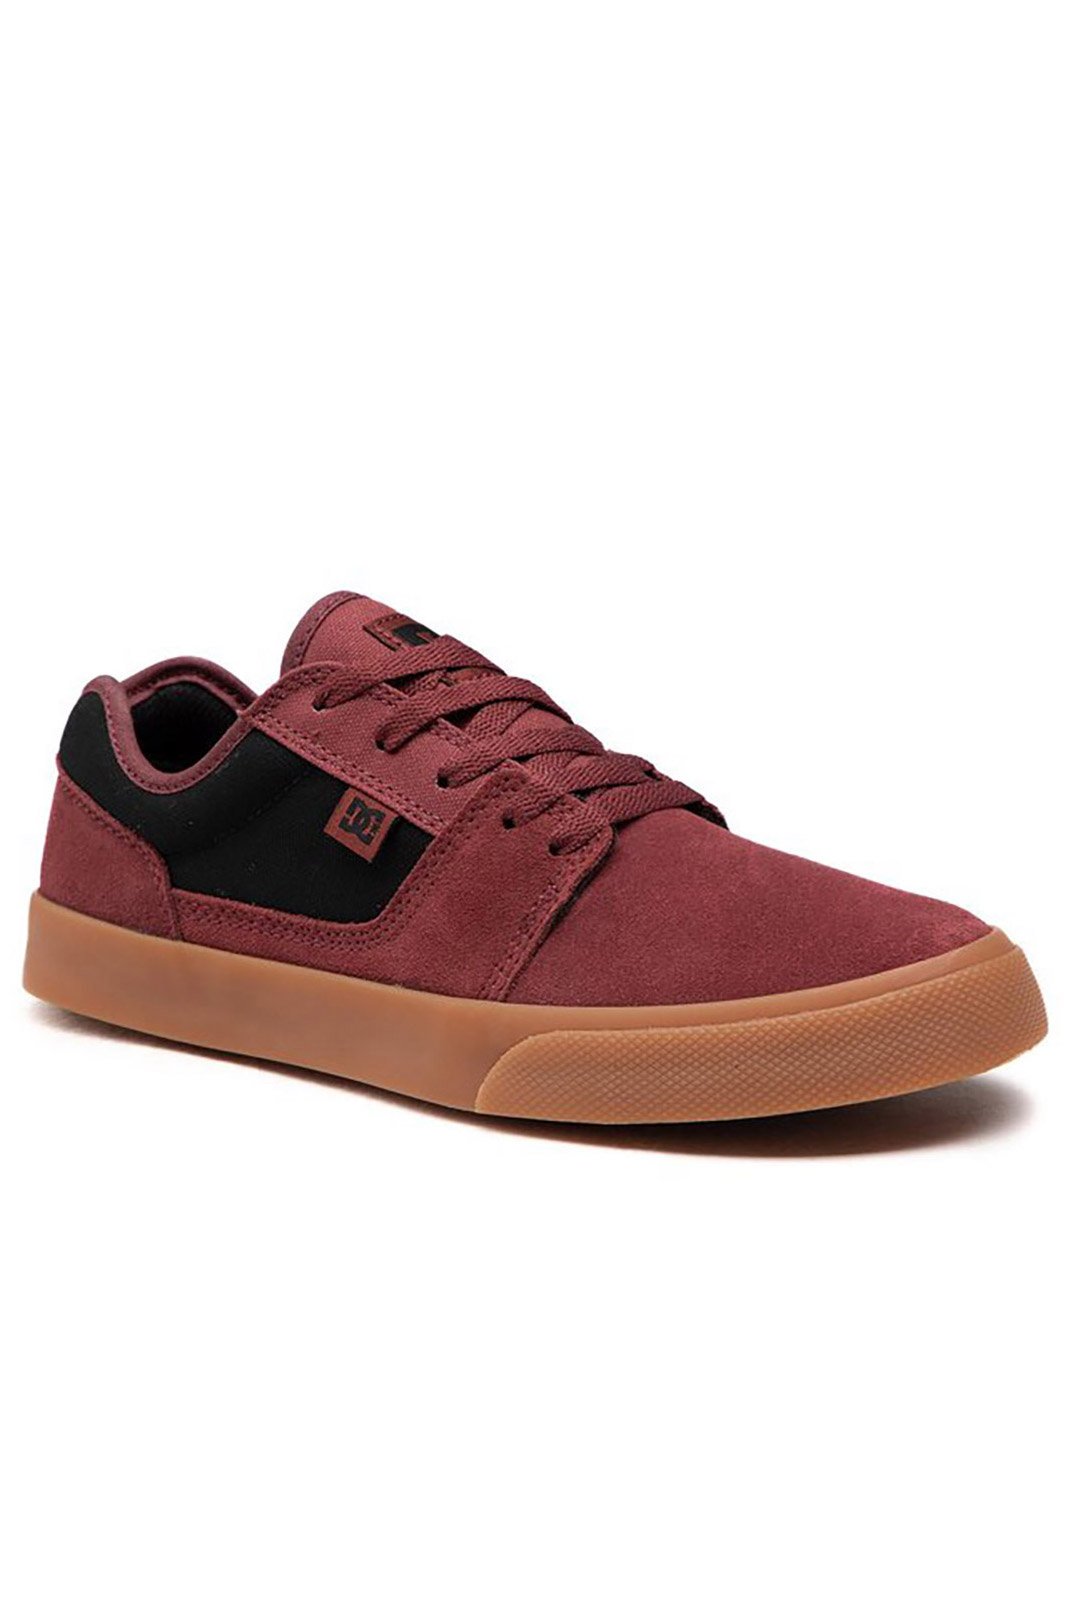 Sneakers / Sport  Dc shoes ADYS300660 BT3